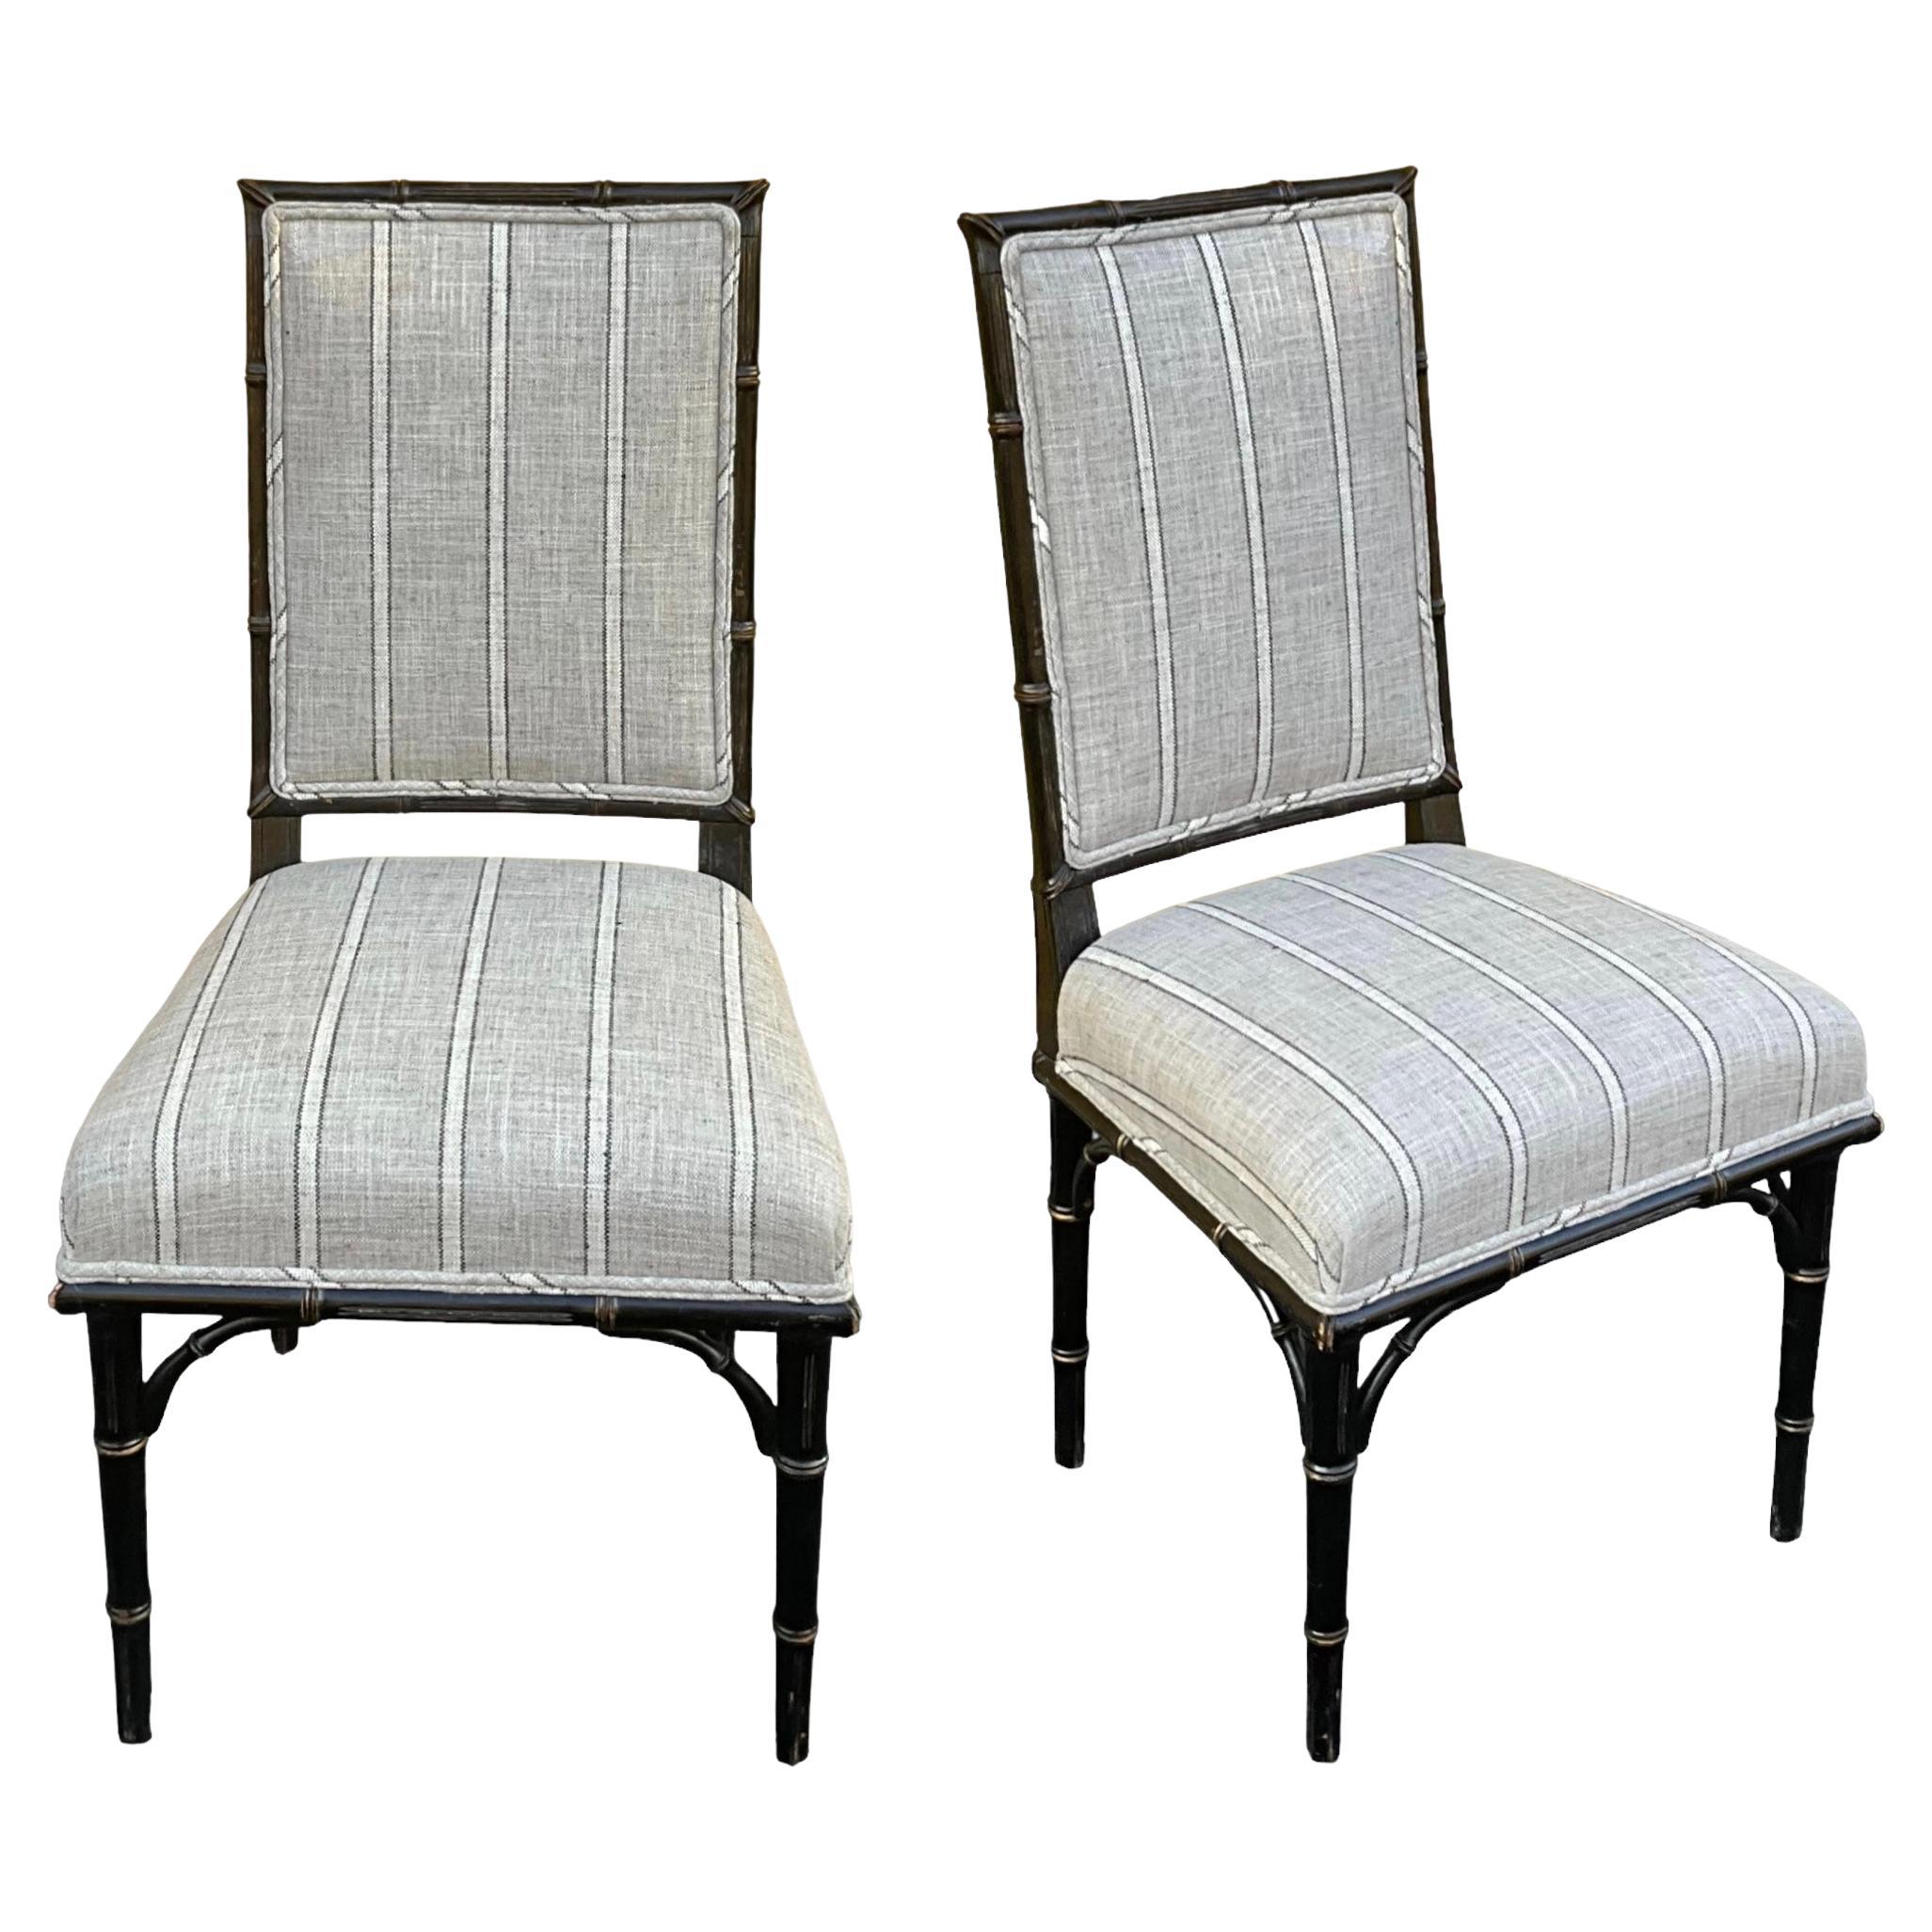 Early 20th-C. Regency Style Ebonized Faux Bamboo Side Chairs In Linen -Pair For Sale